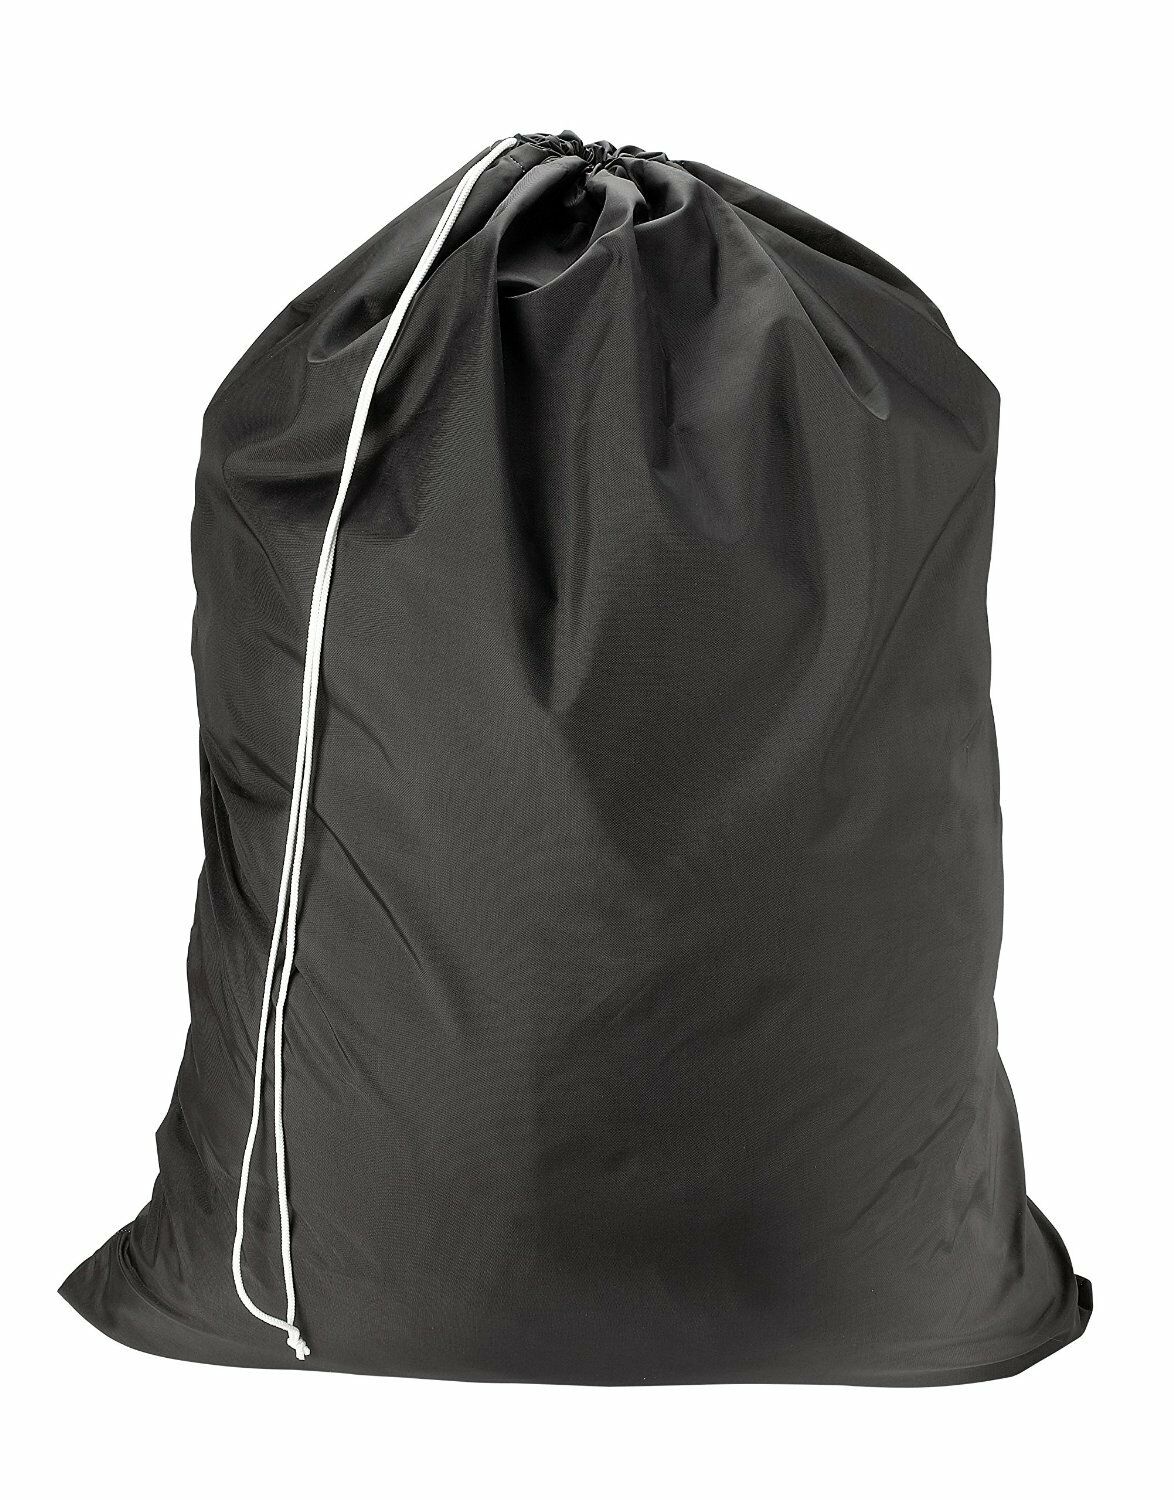 Durable Nylon Laundry Bag - Great For College Or Laundromat. | Assorted Colors